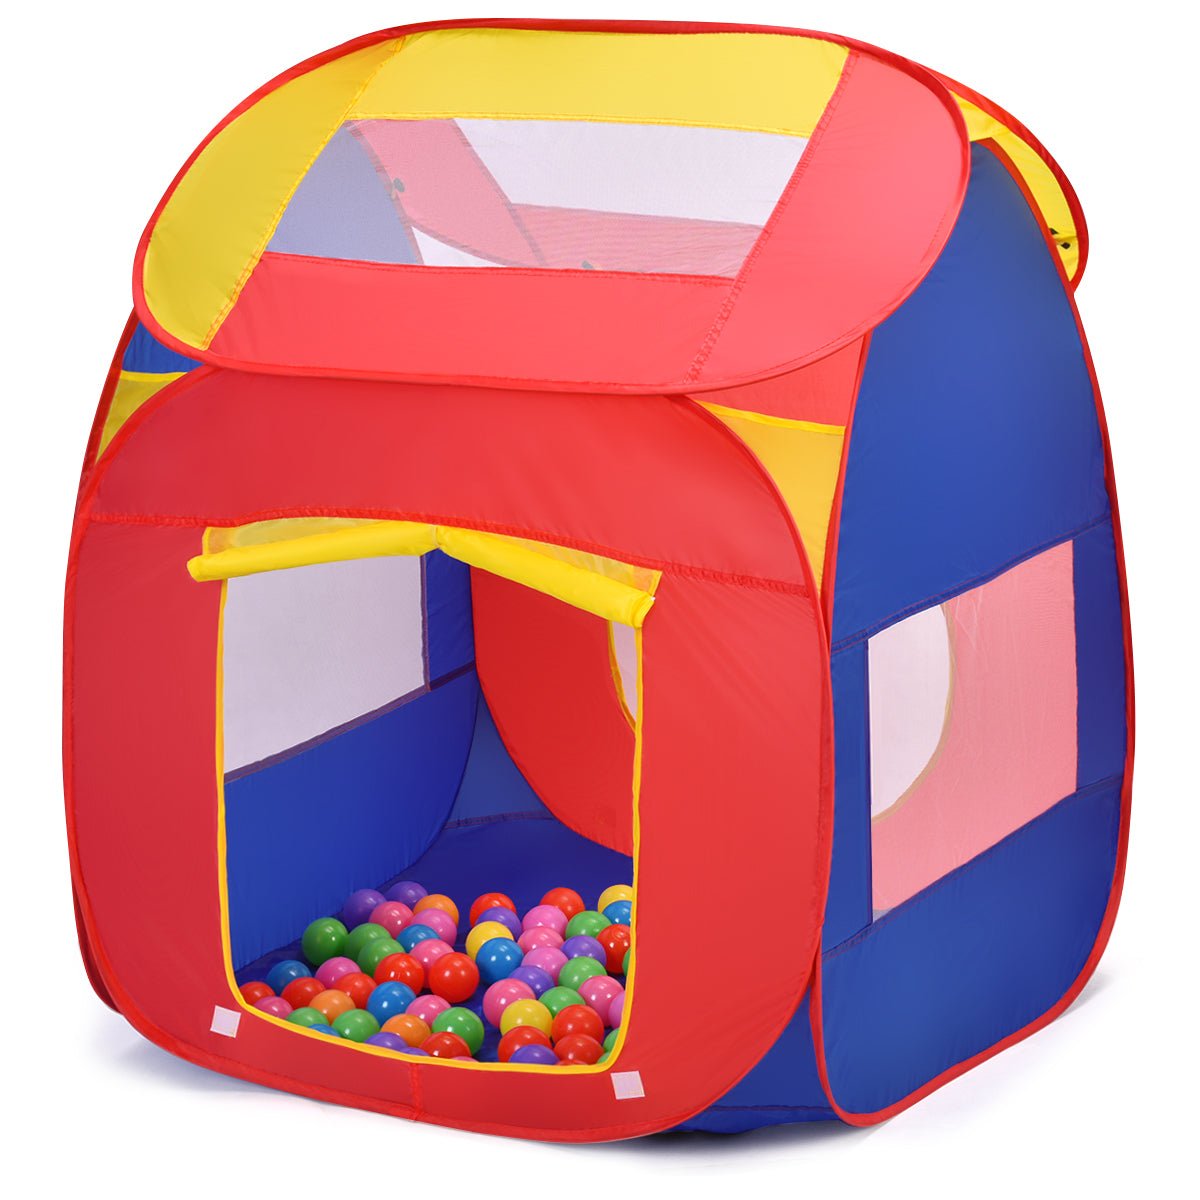 Interactive Play: Portable Play House with 100 Balls for Kids Creativity